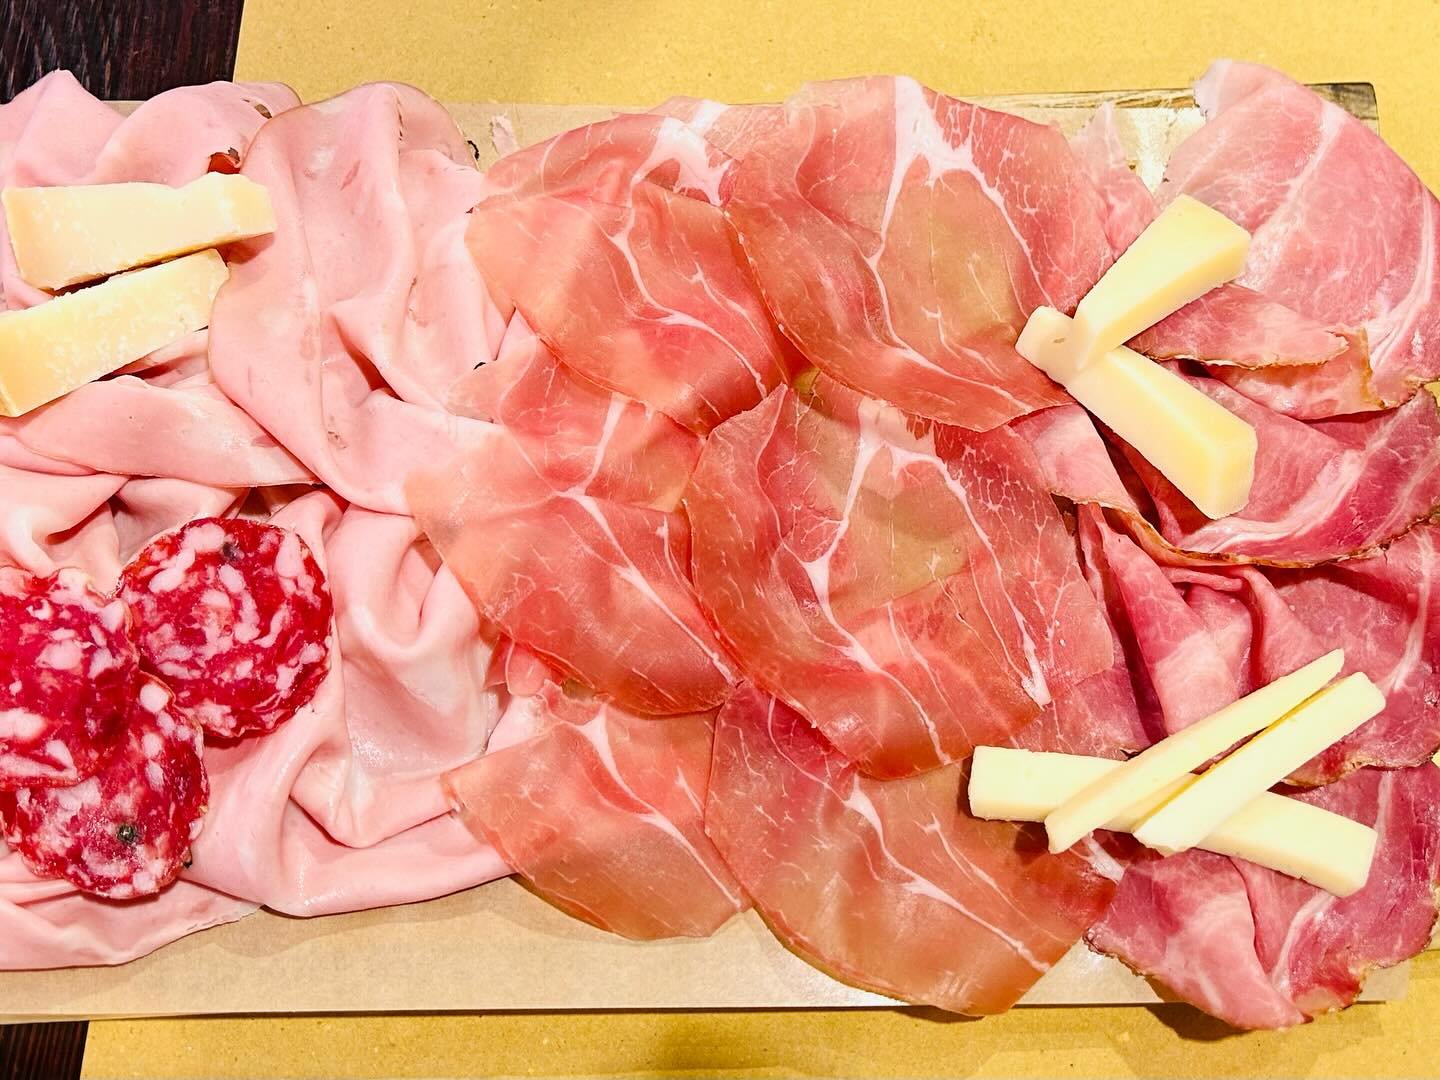 Mortadella studded with cracked black pepper and pistachios and thin wisps of sliced ham and wedges of aged parmigiano all taste so much better in Bologna, the culinary capital of Italy!